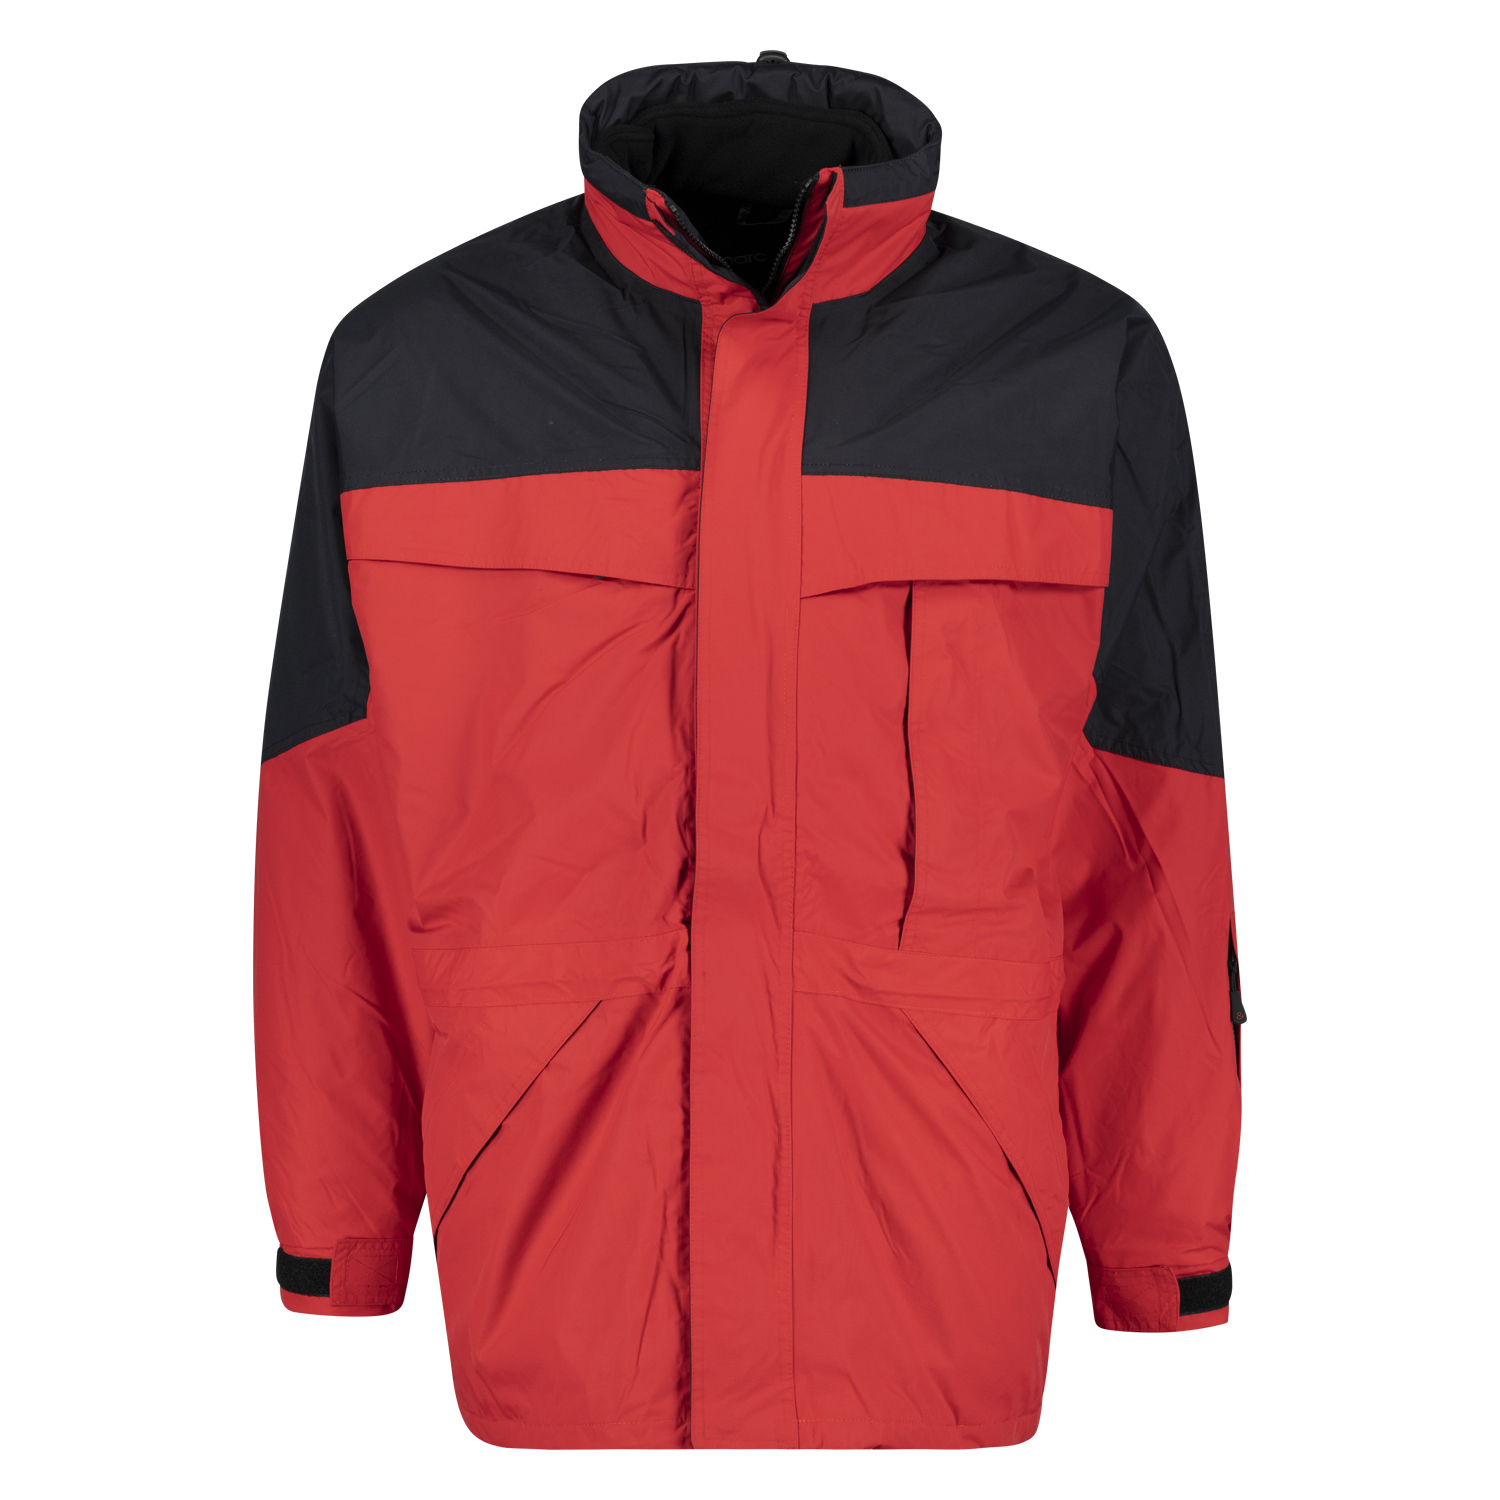 Red 3in1 jacket by marc&mark in oversizes up to 10XL